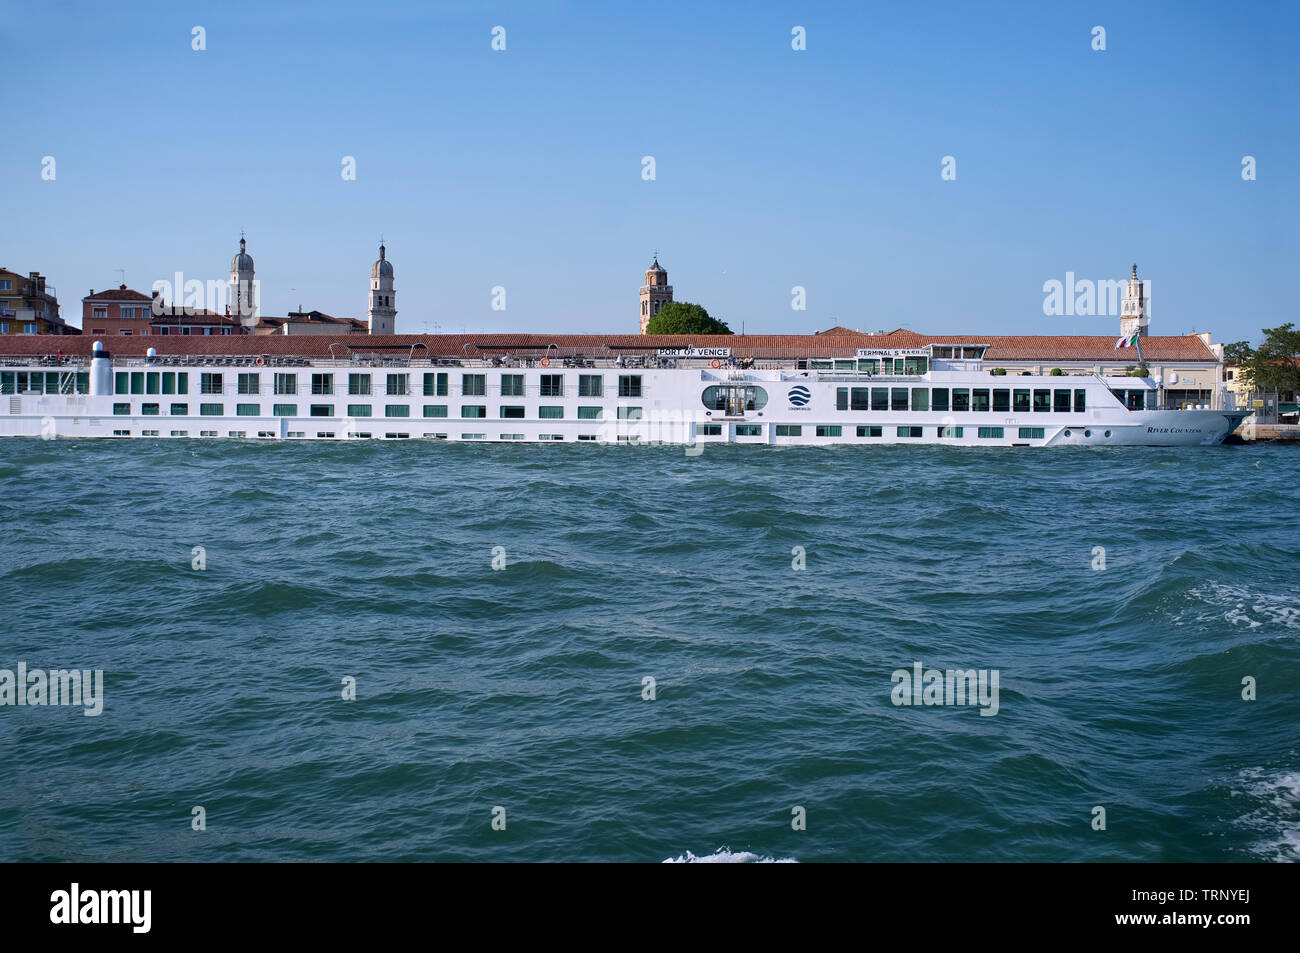 10 - May - 2019, Venice, Italy: River Countess ferry boat, involved in the accident with the cruise ship MSC Opera in the Giudecca canal in Venice 2/0 Stock Photo